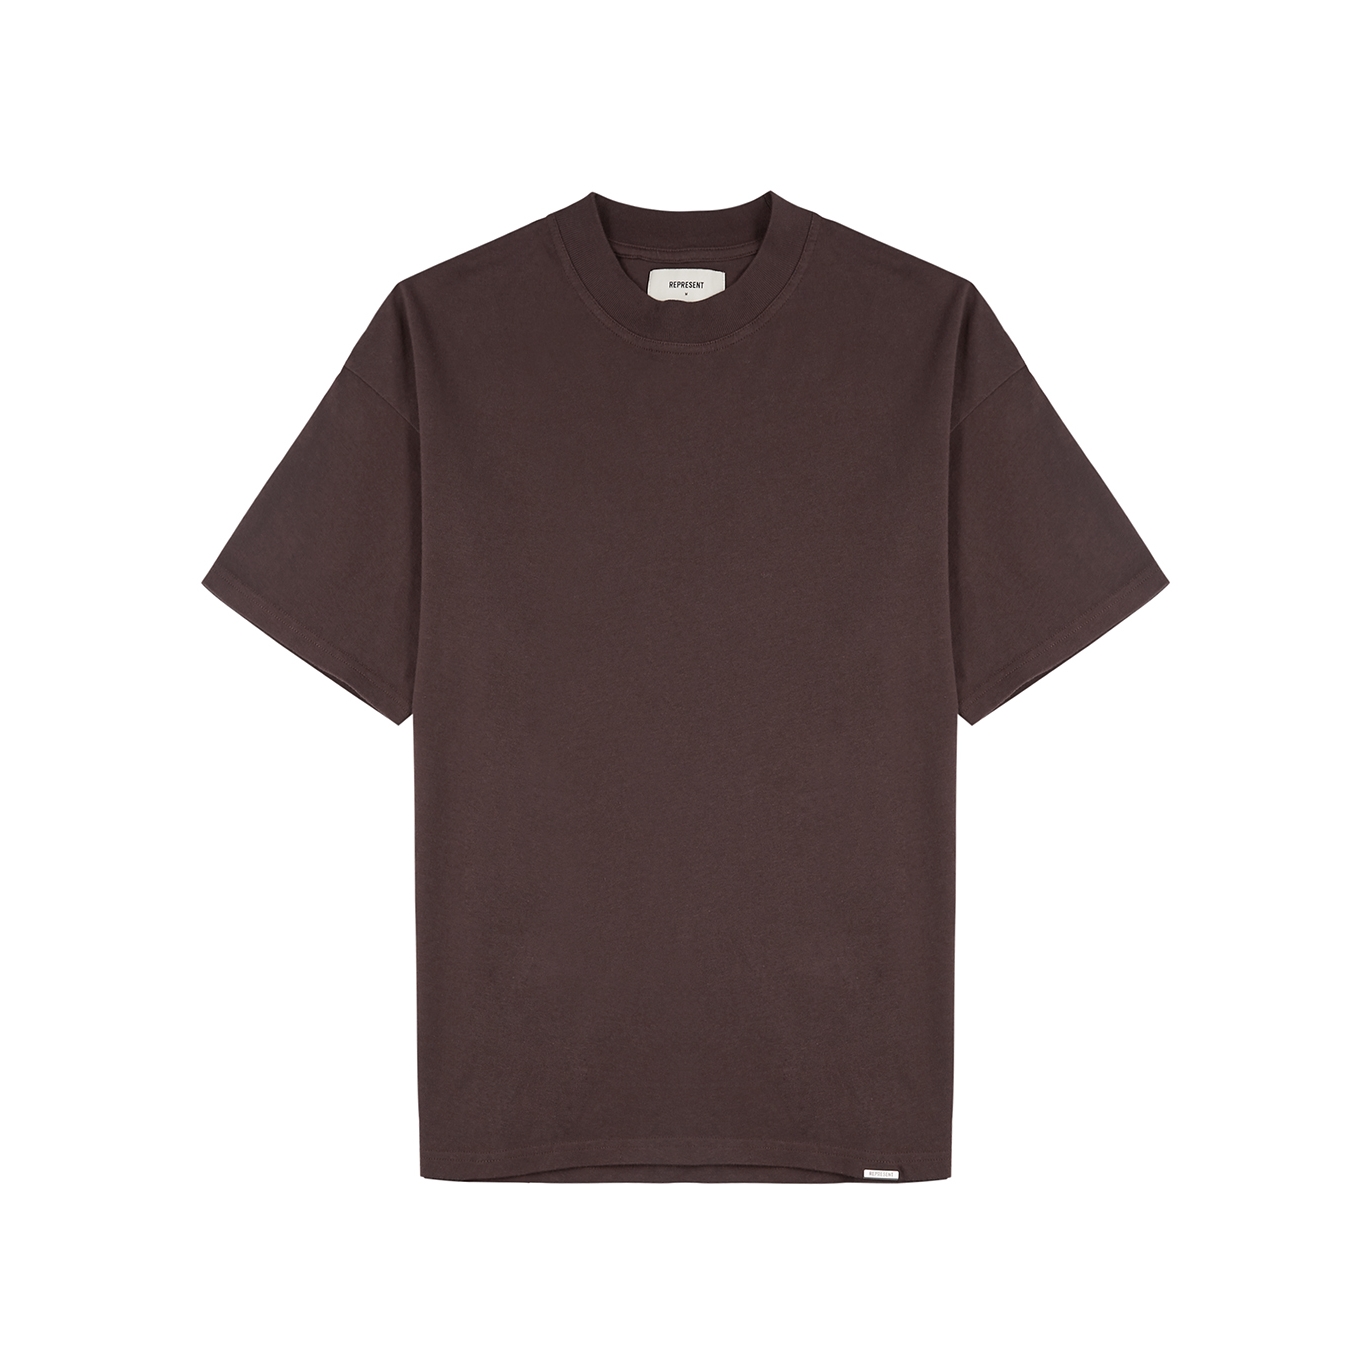 Represent Blank Brown Cotton T-shirt - Maroon - S